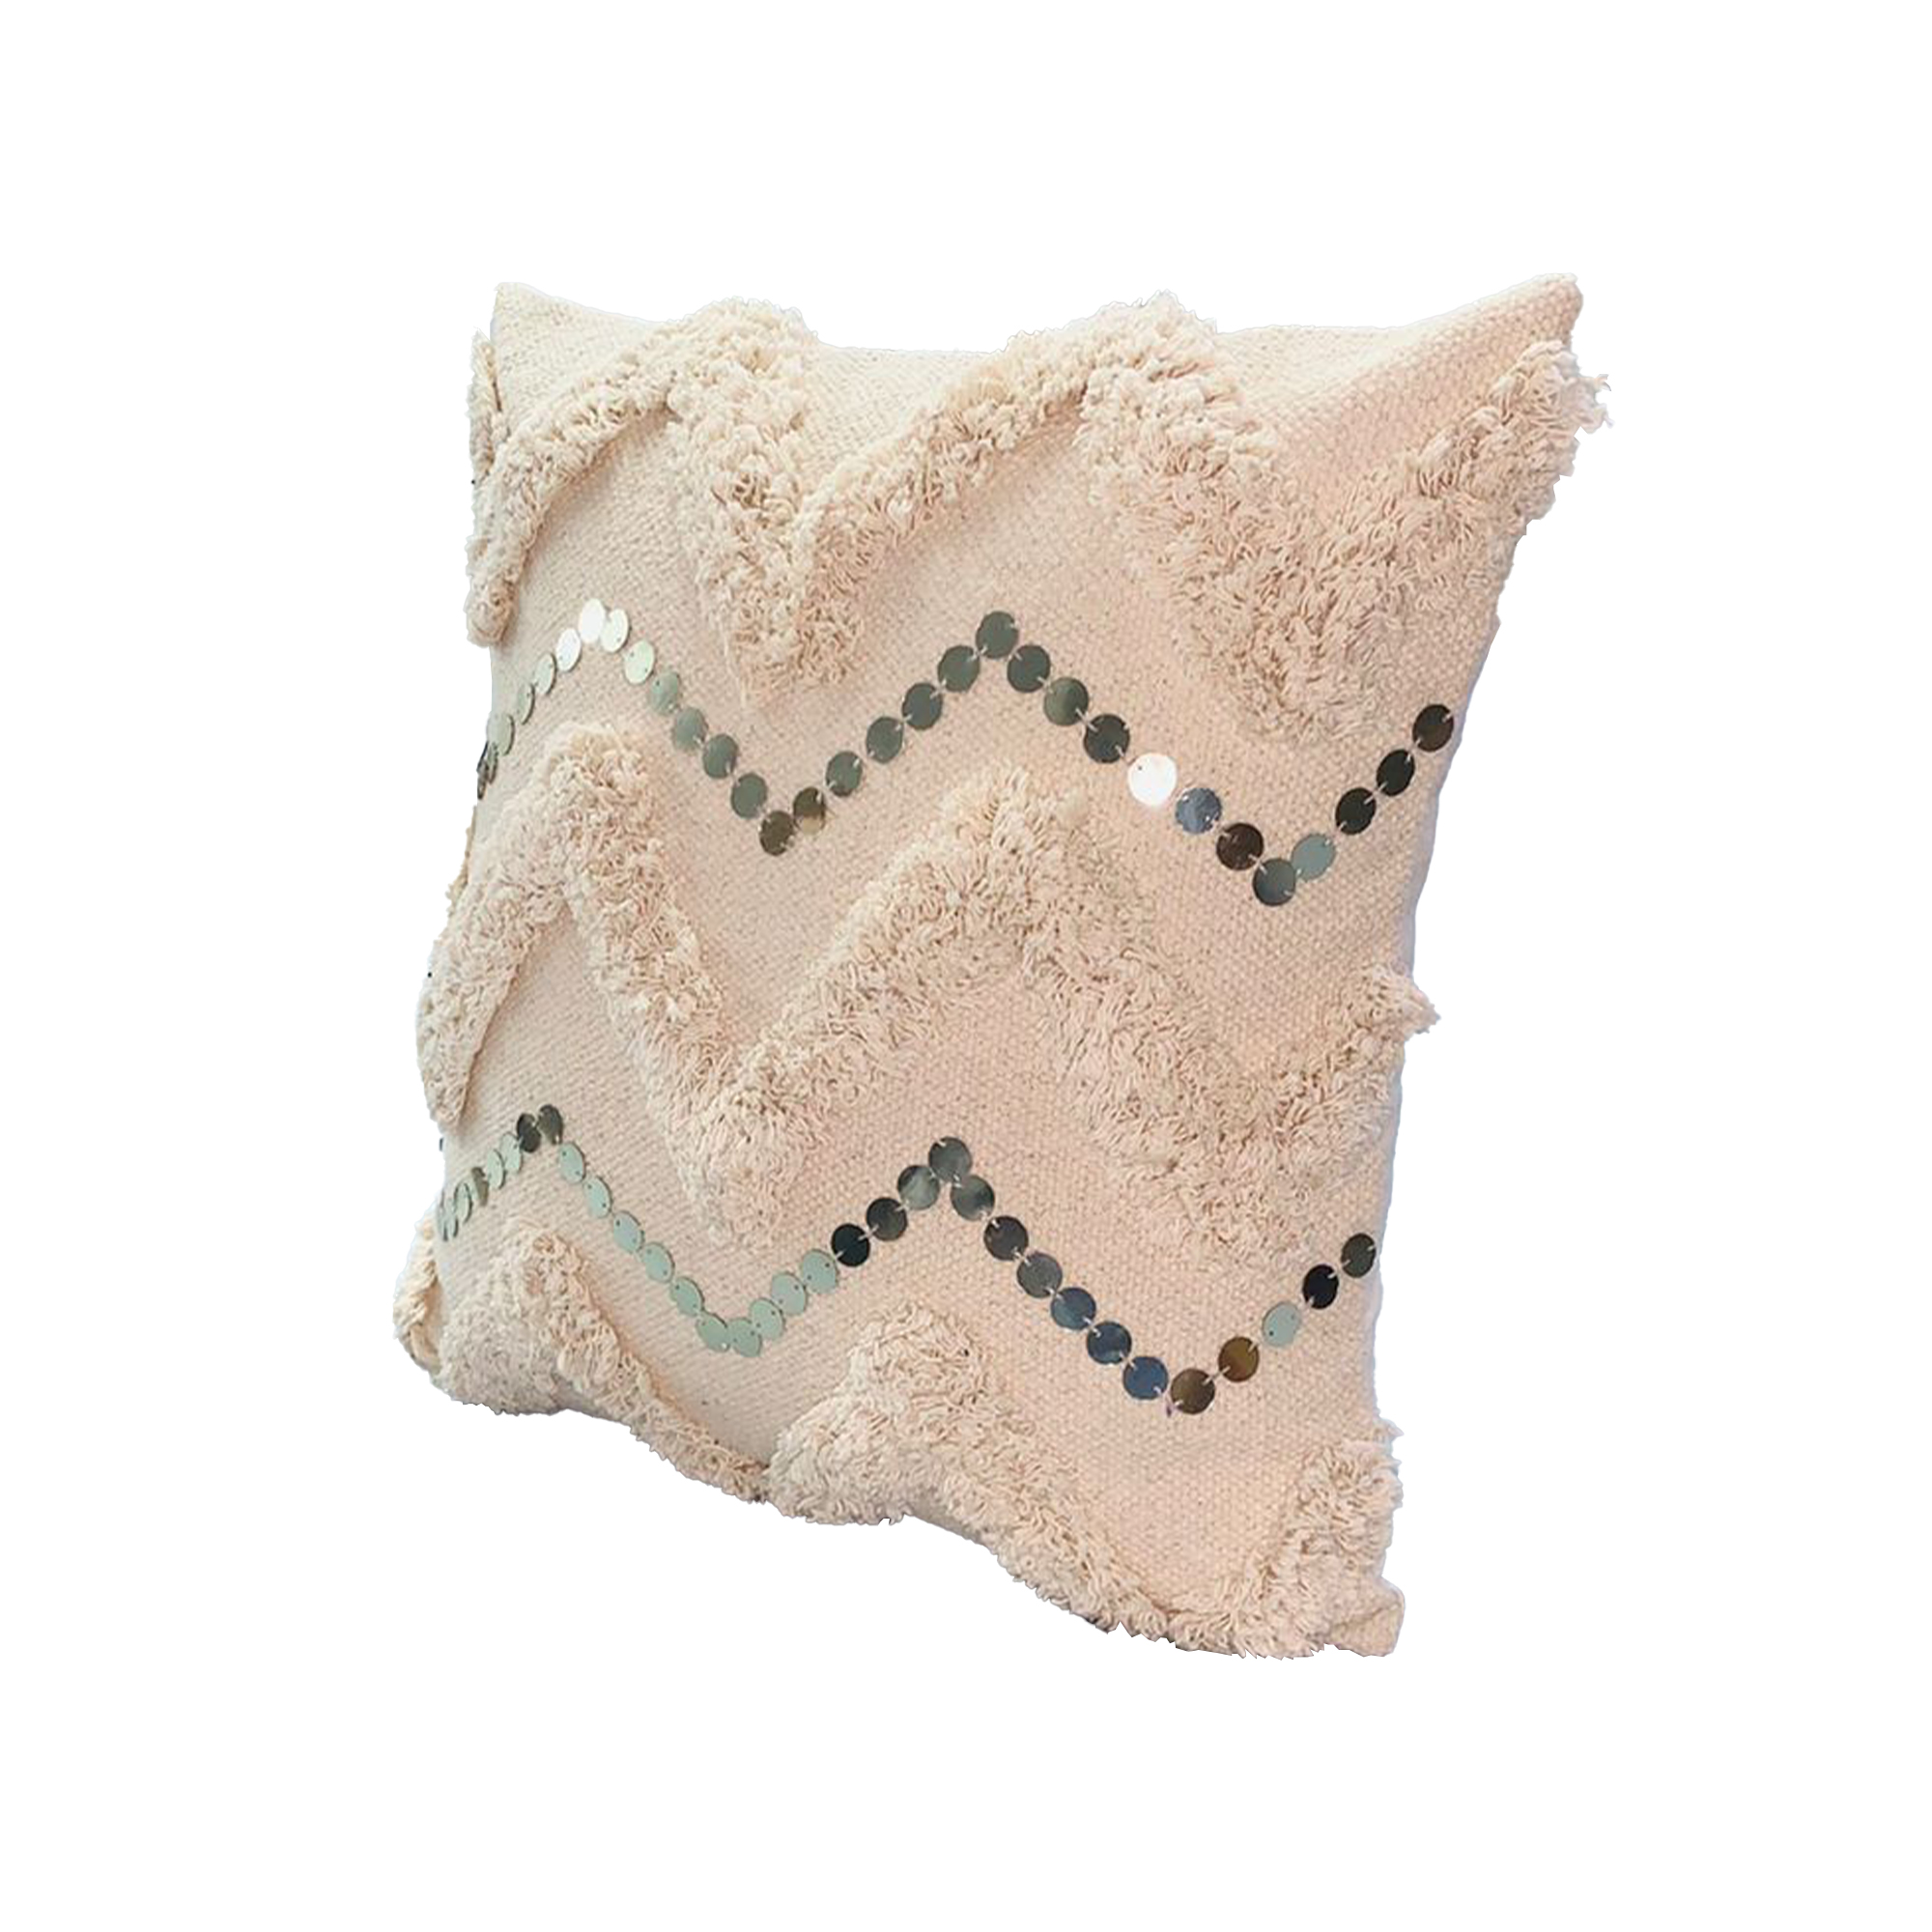 18 x 18 Square Cotton Accent Throw Pillow, Handcrafted Chevron Patchwork, Sequins, Blush Pink